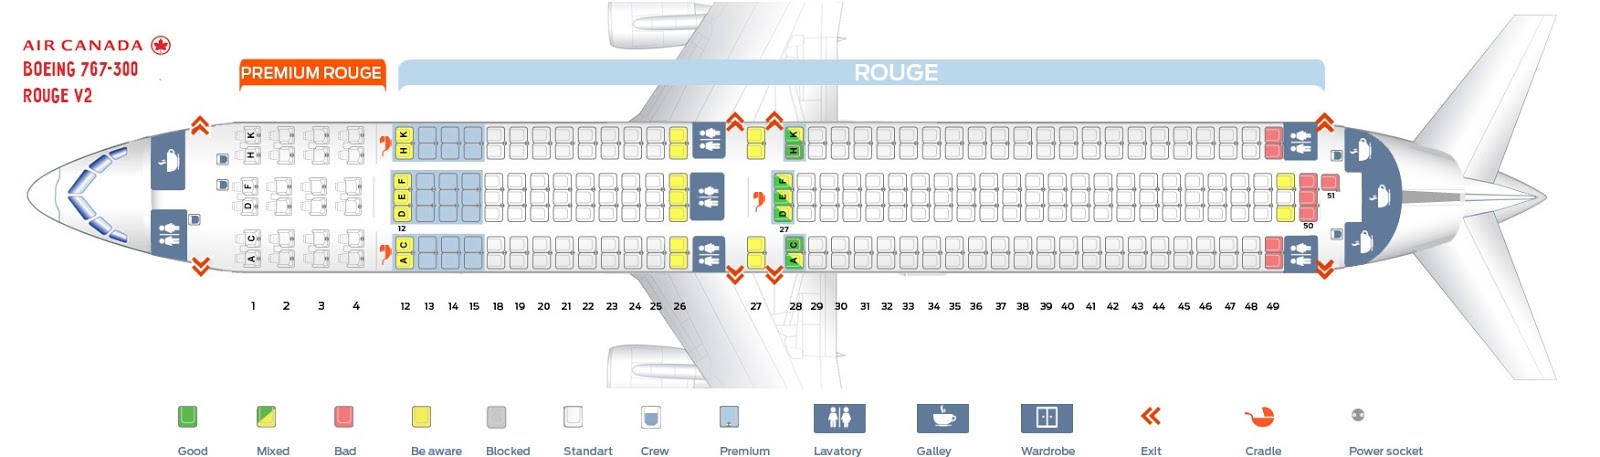 Boeing 767 400 Jet Seating Chart